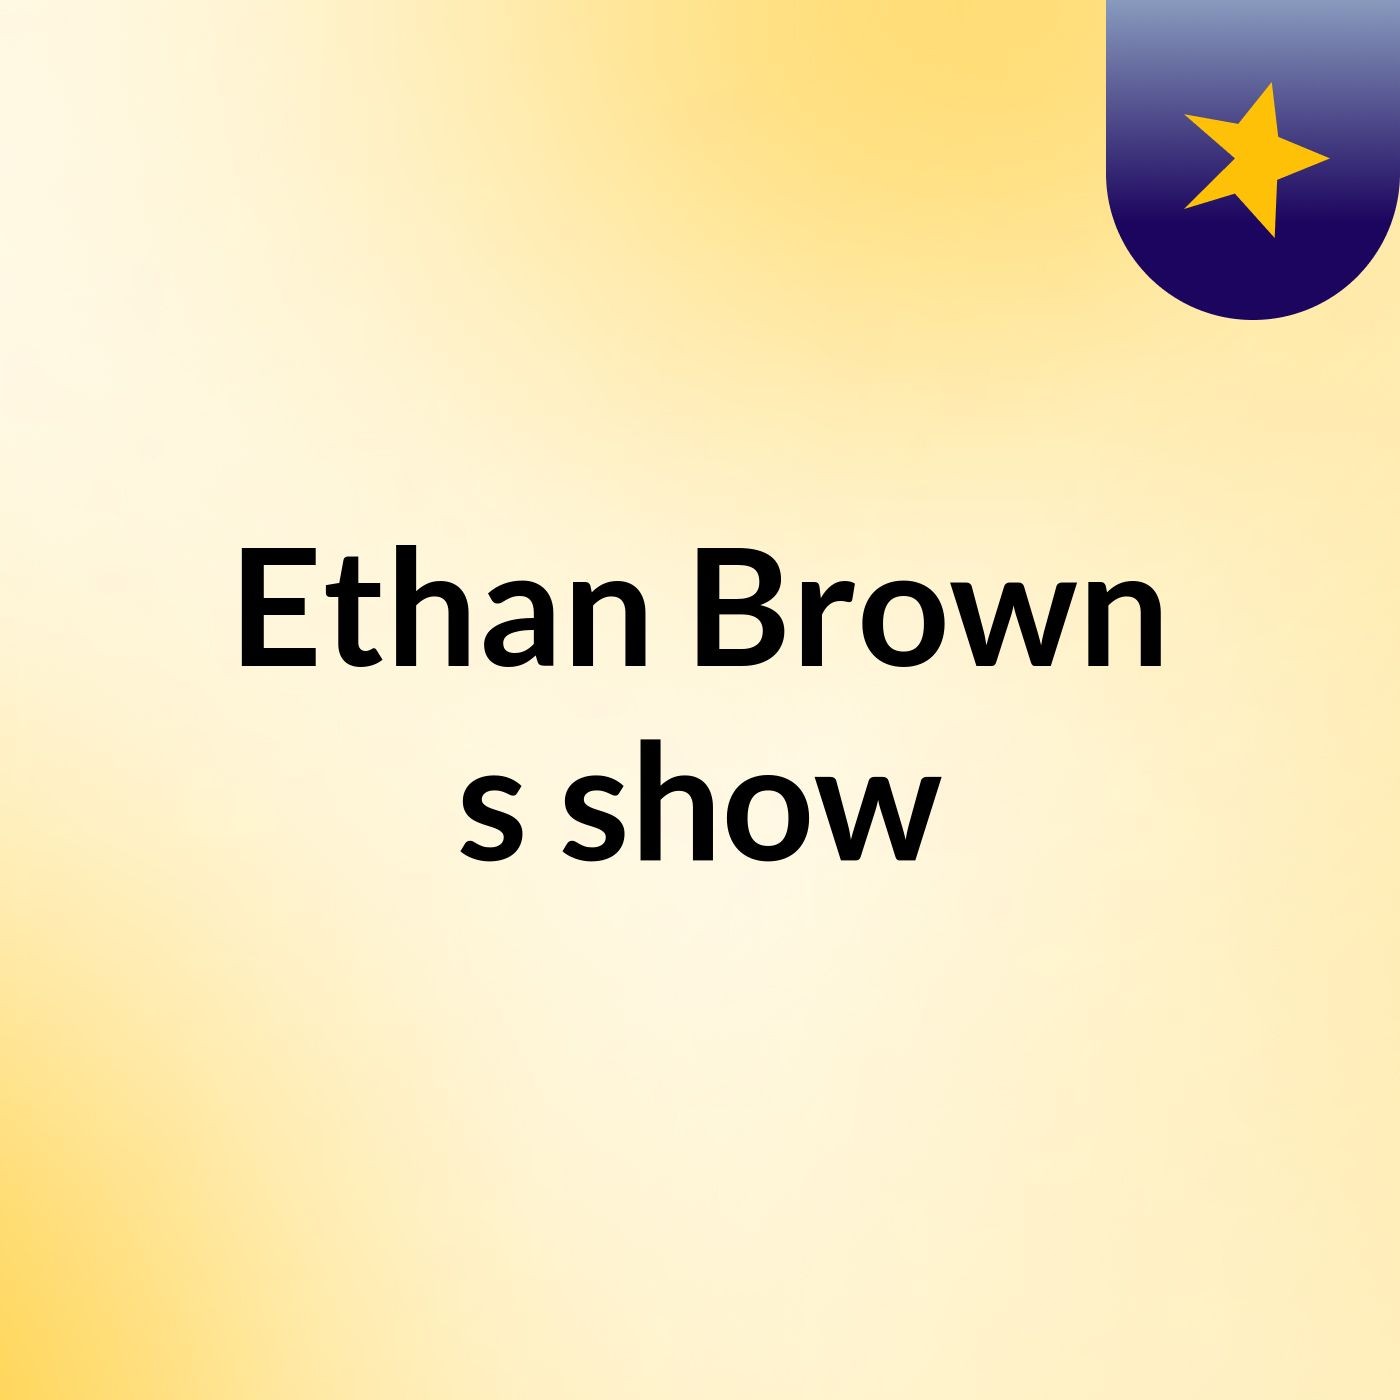 Ethan Brown's show